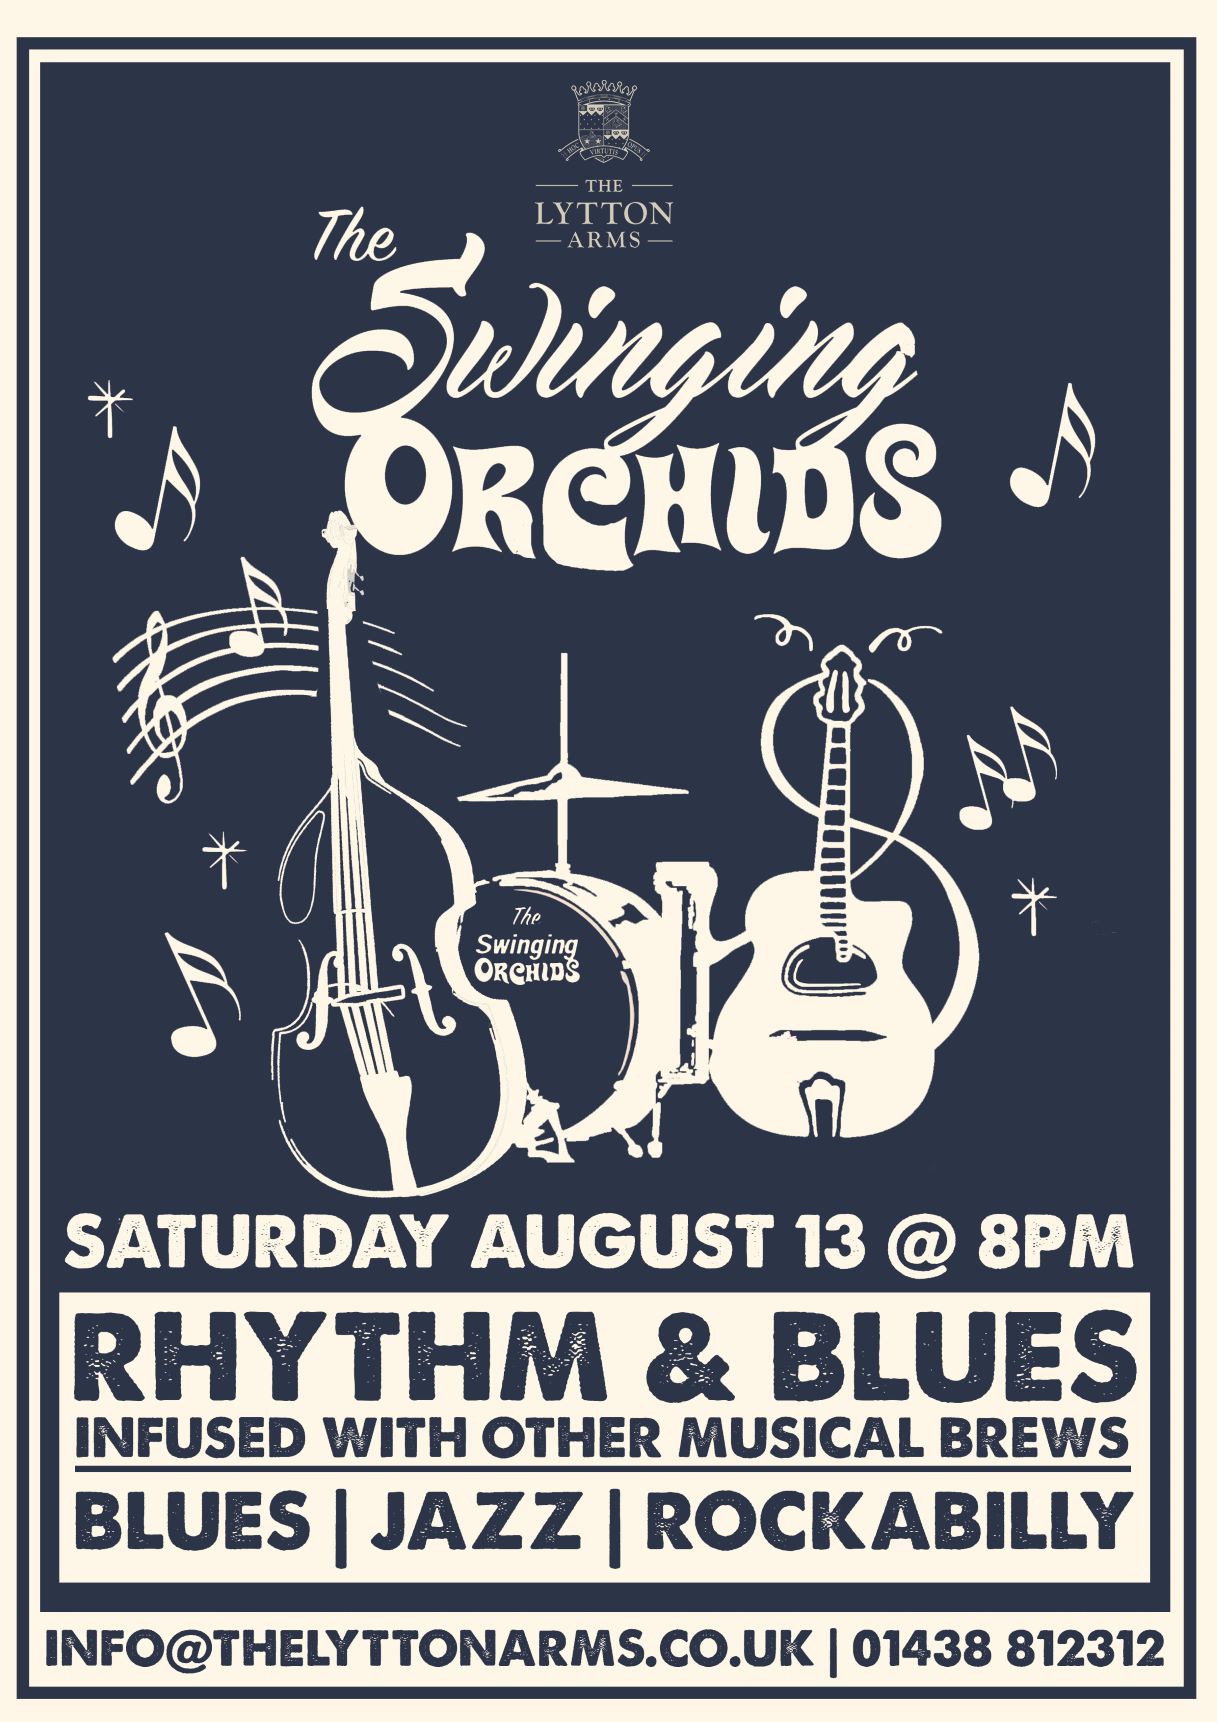 The Swinging Orchids at The Lytton Arms